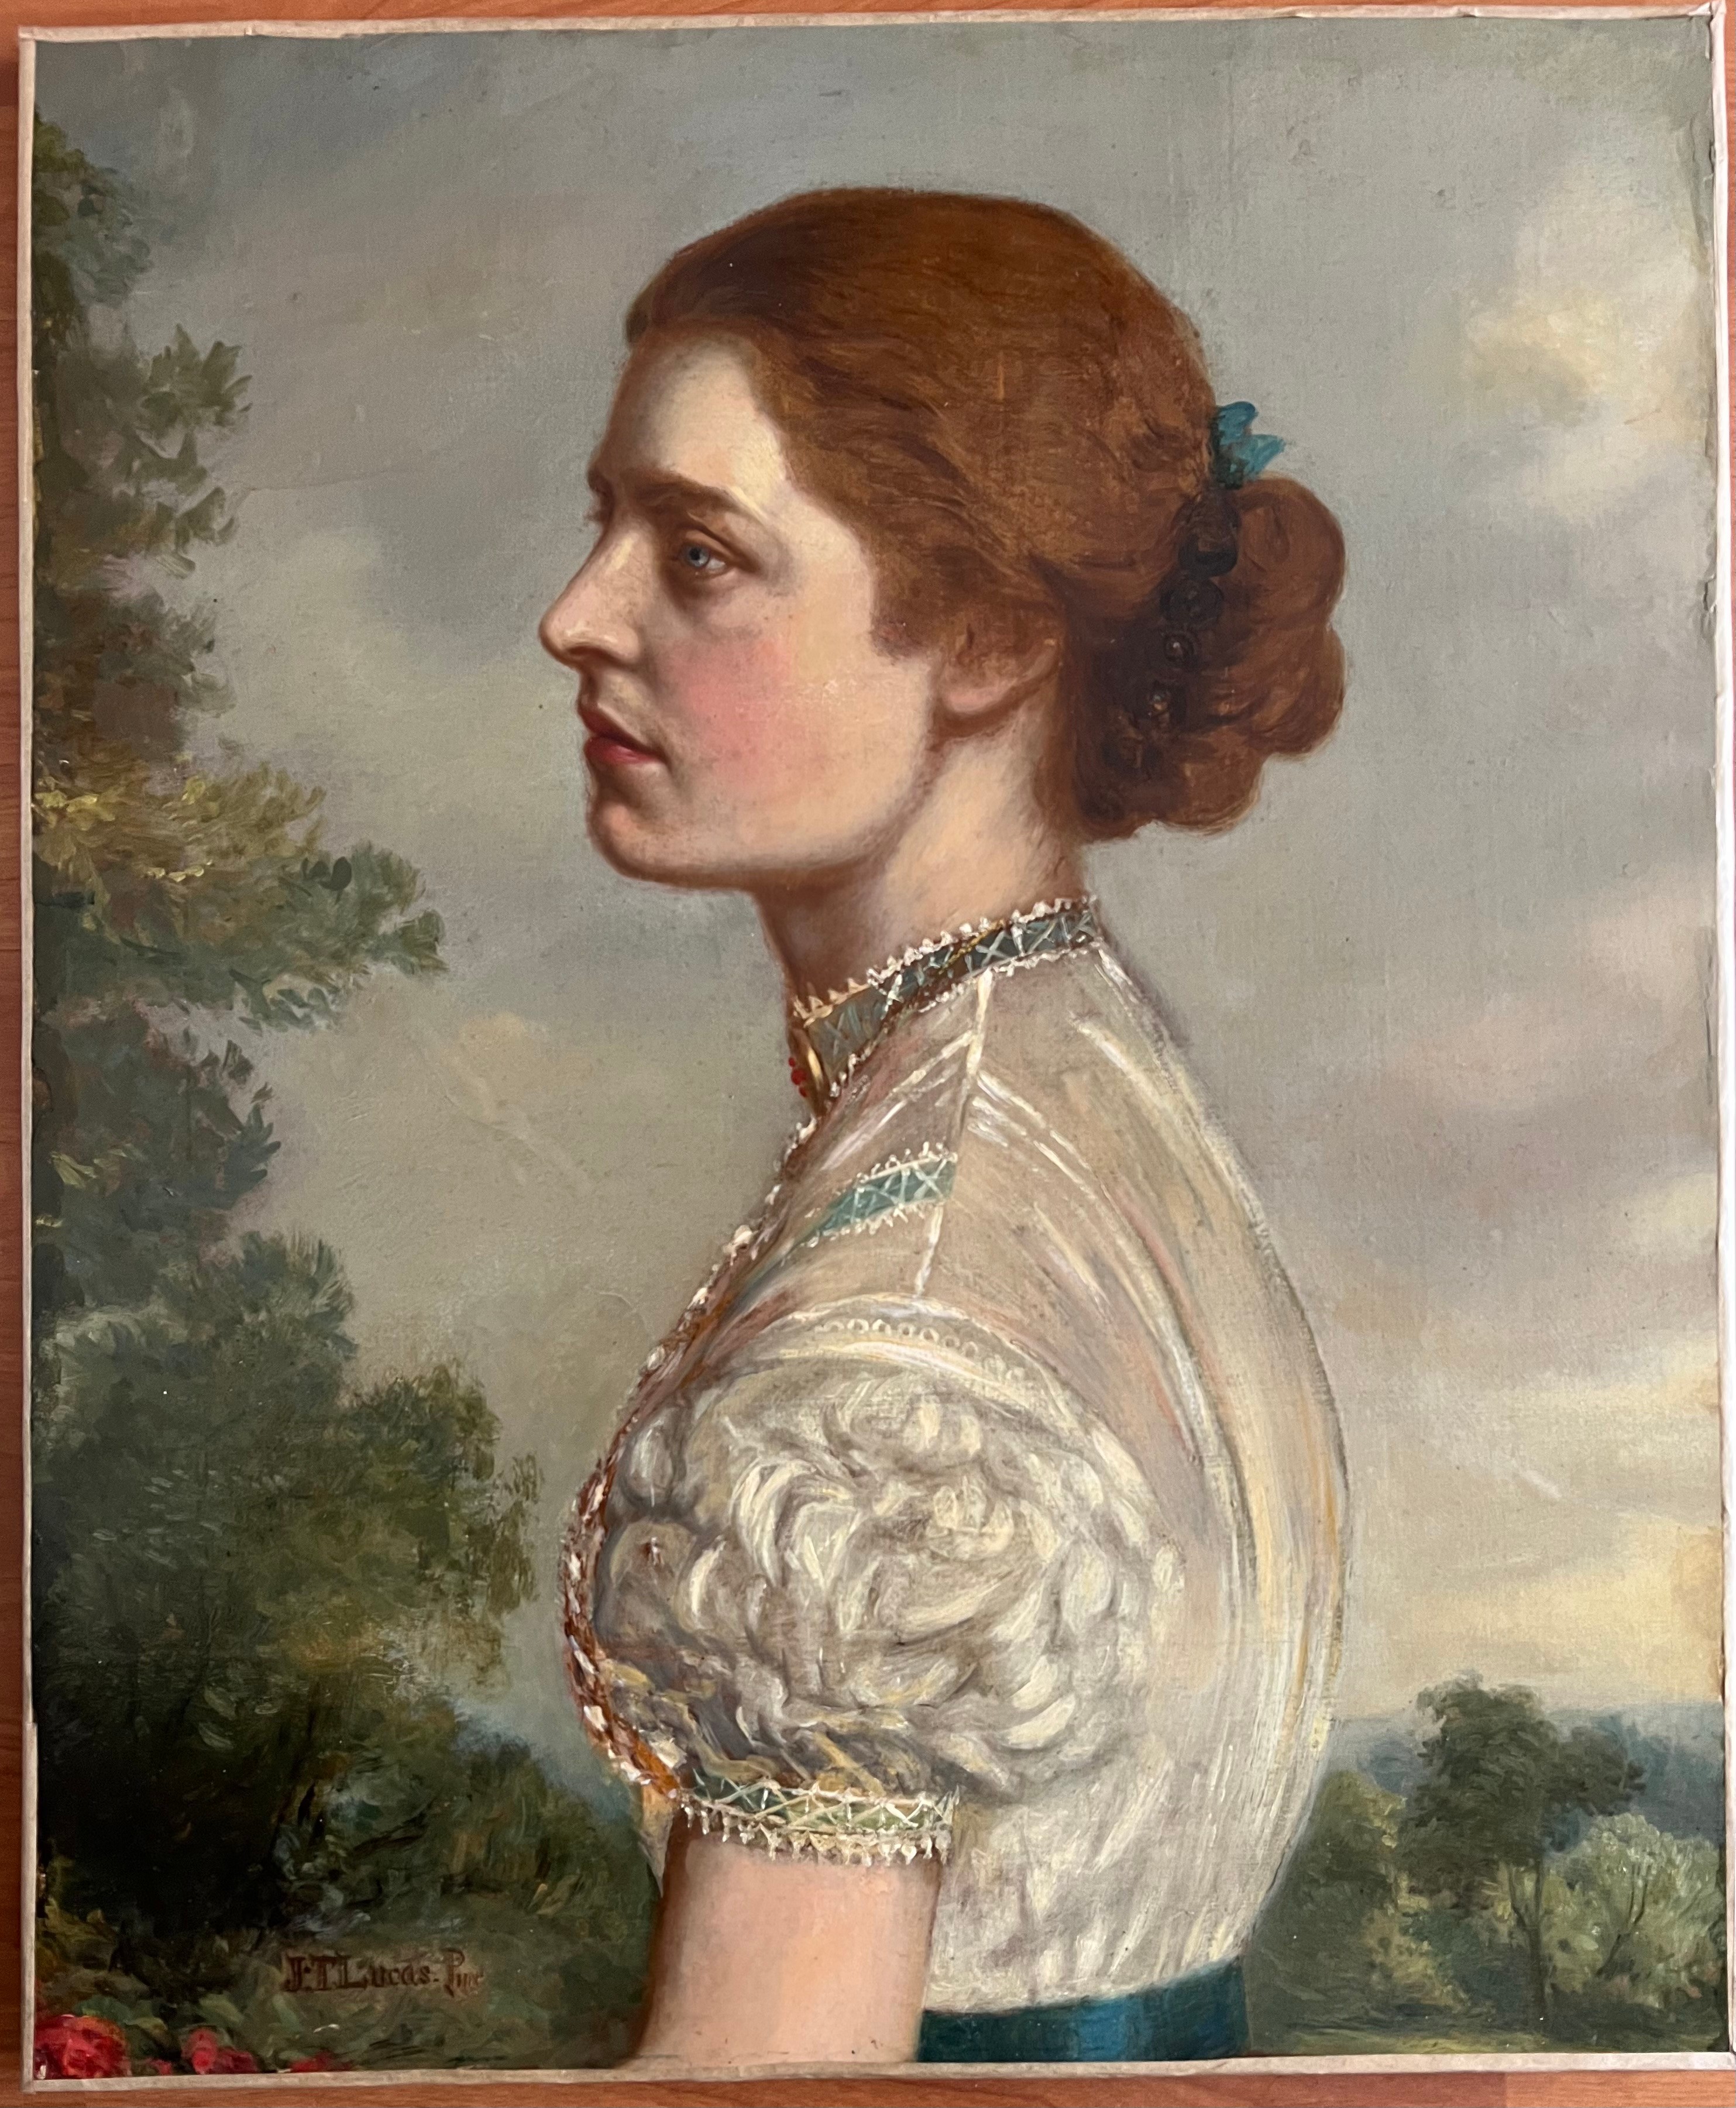 John Templeton Lucas (1836-1880). Oil on canvas. “Portrait of a Lady in a Lace Dress”. Signed.